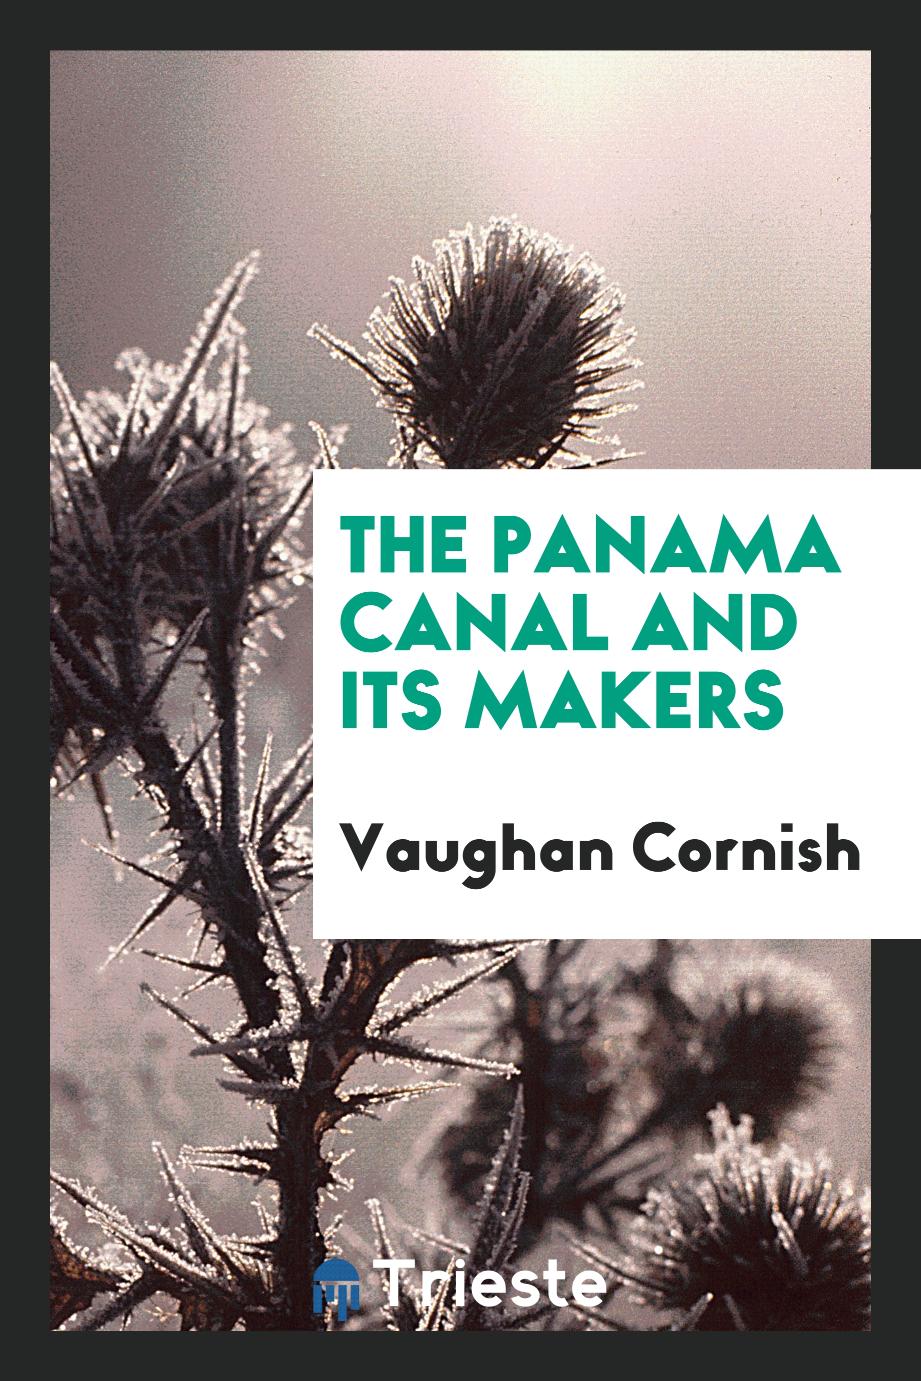 The Panama canal and its makers